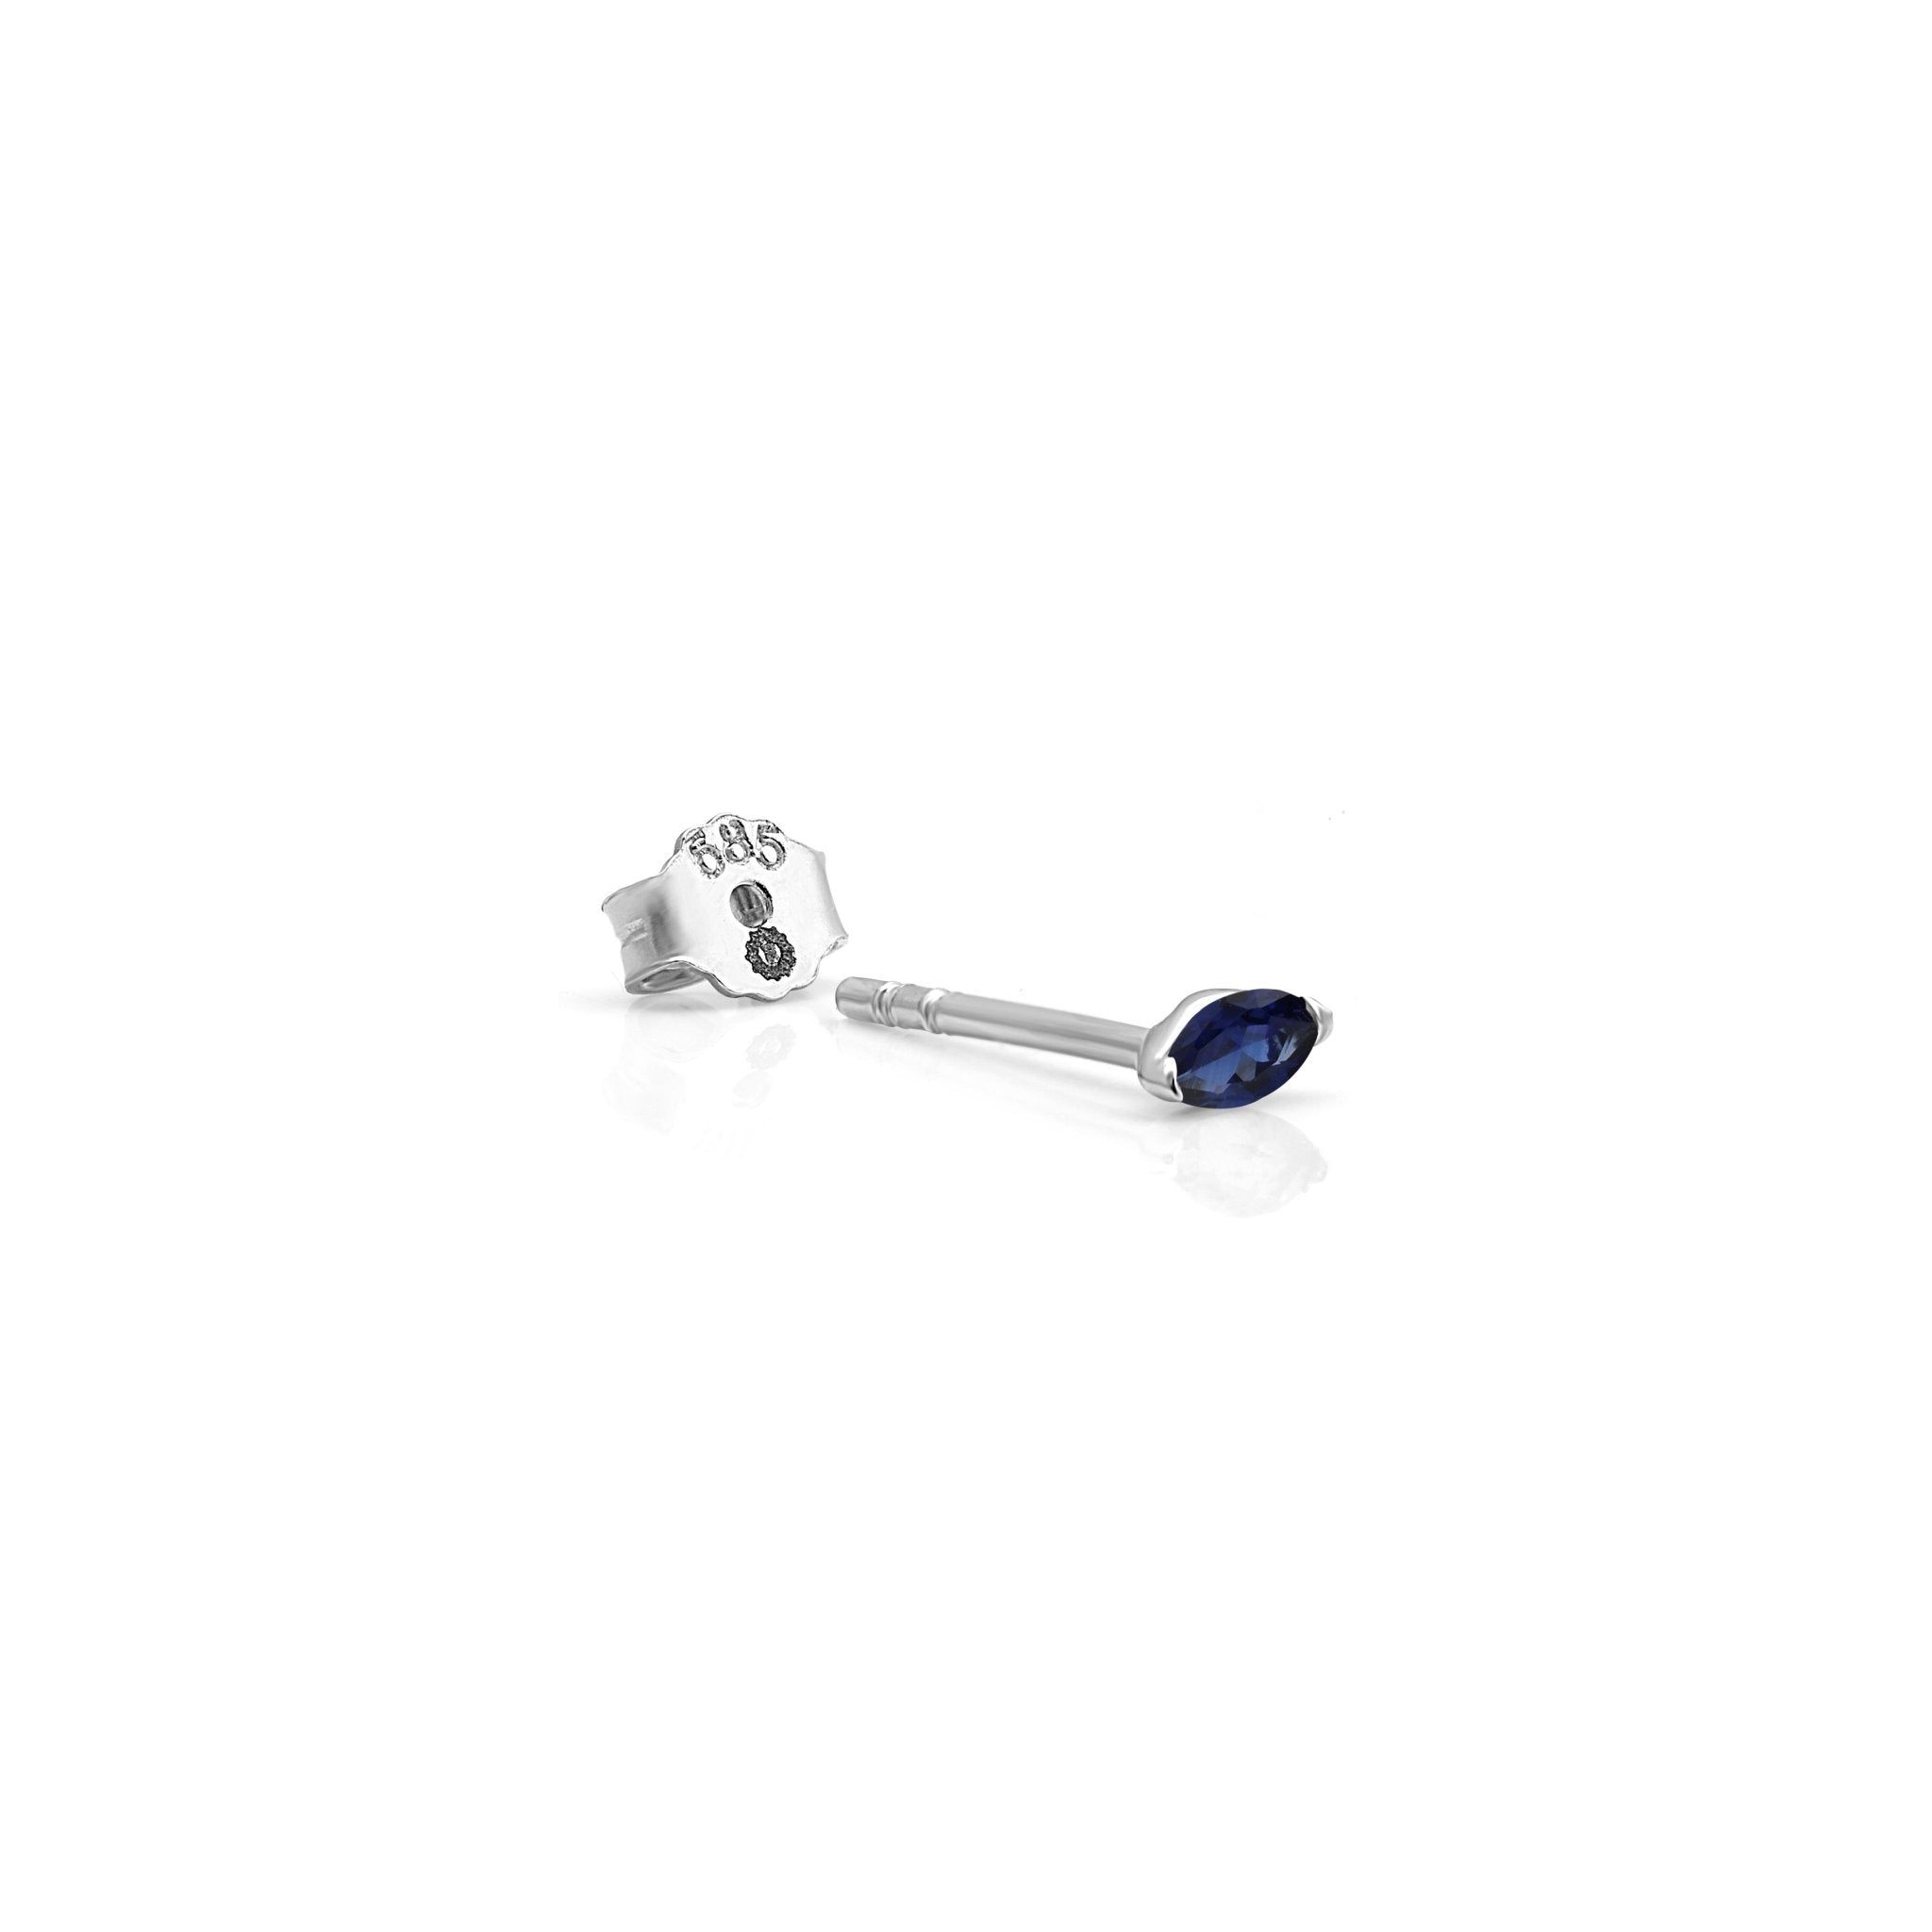 Blue Sapphire Marquise Screw Back Earring Earrings Estella Collection #product_description# 17985 14k Birthstone Birthstone Earrings #tag4# #tag5# #tag6# #tag7# #tag8# #tag9# #tag10#